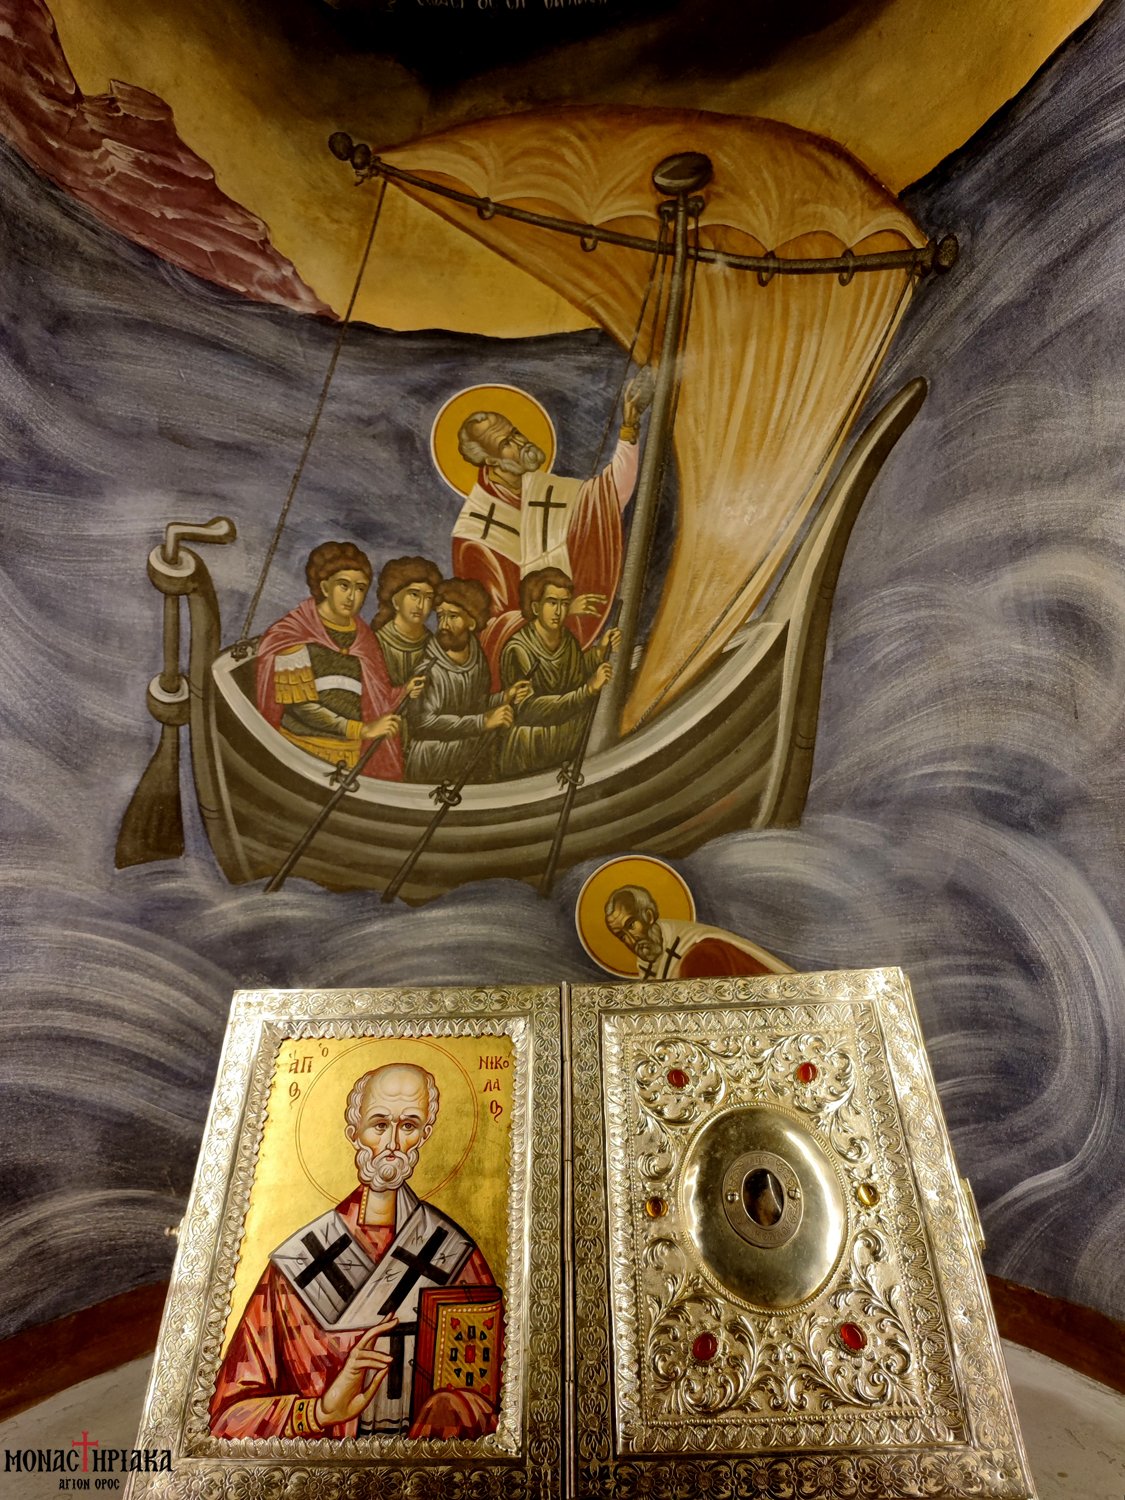 The miracle of Saint Nicholas with the sea storm